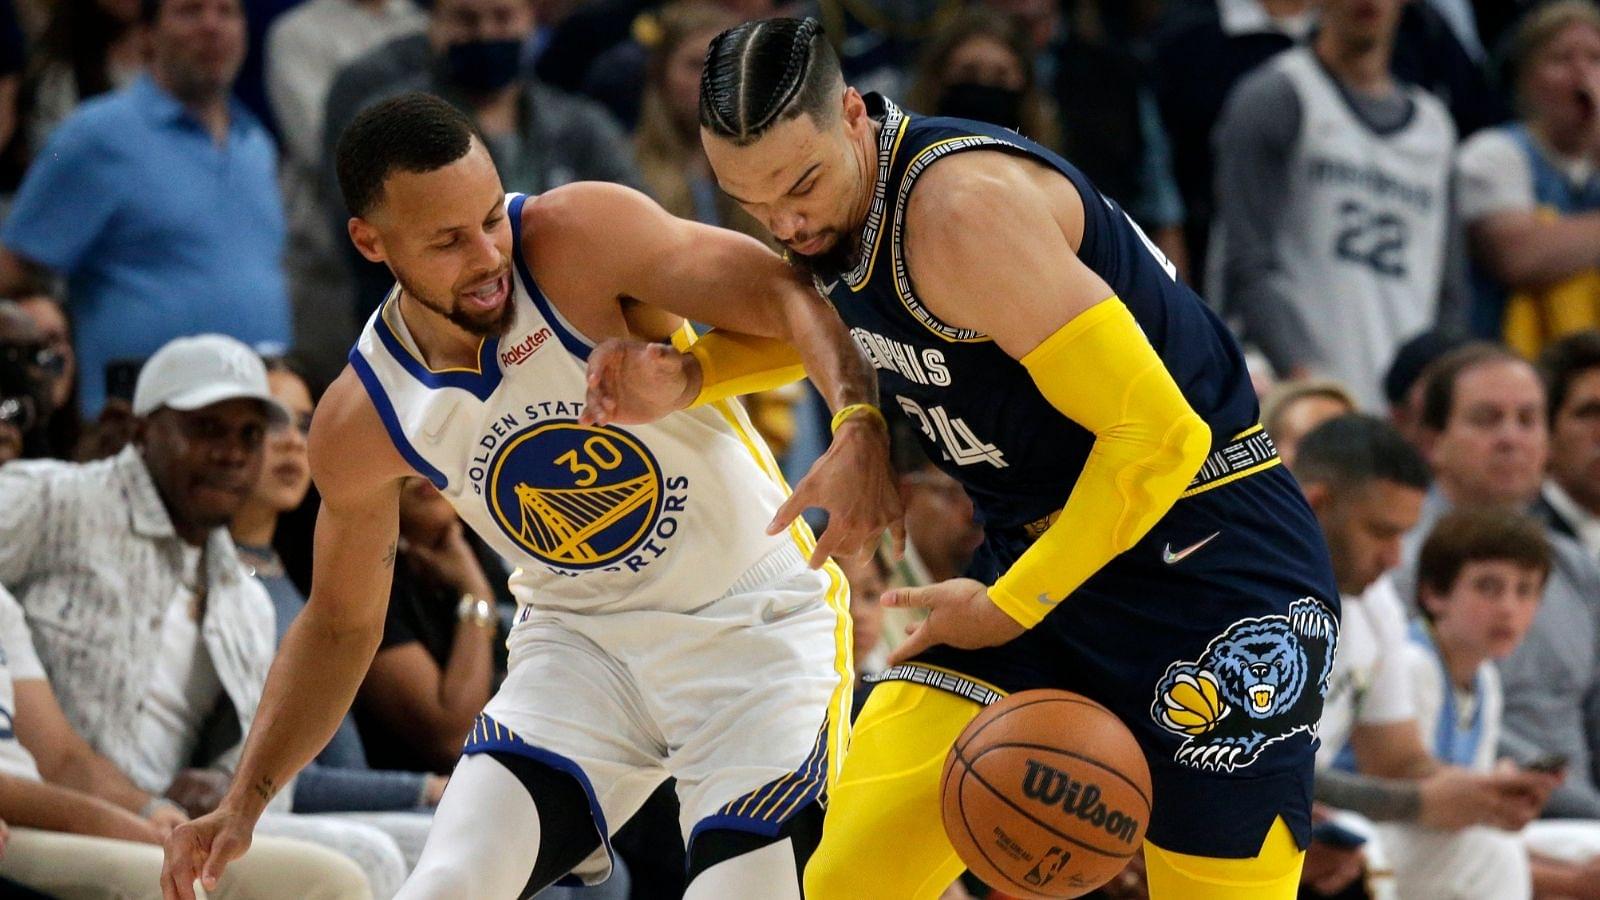 "Referees just made sure America's darling Stephen Curry advances to play the Suns": Skip Bayless is disgruntled by officials calling Flagrant 2 on Grizzlies' Dillon Brooks